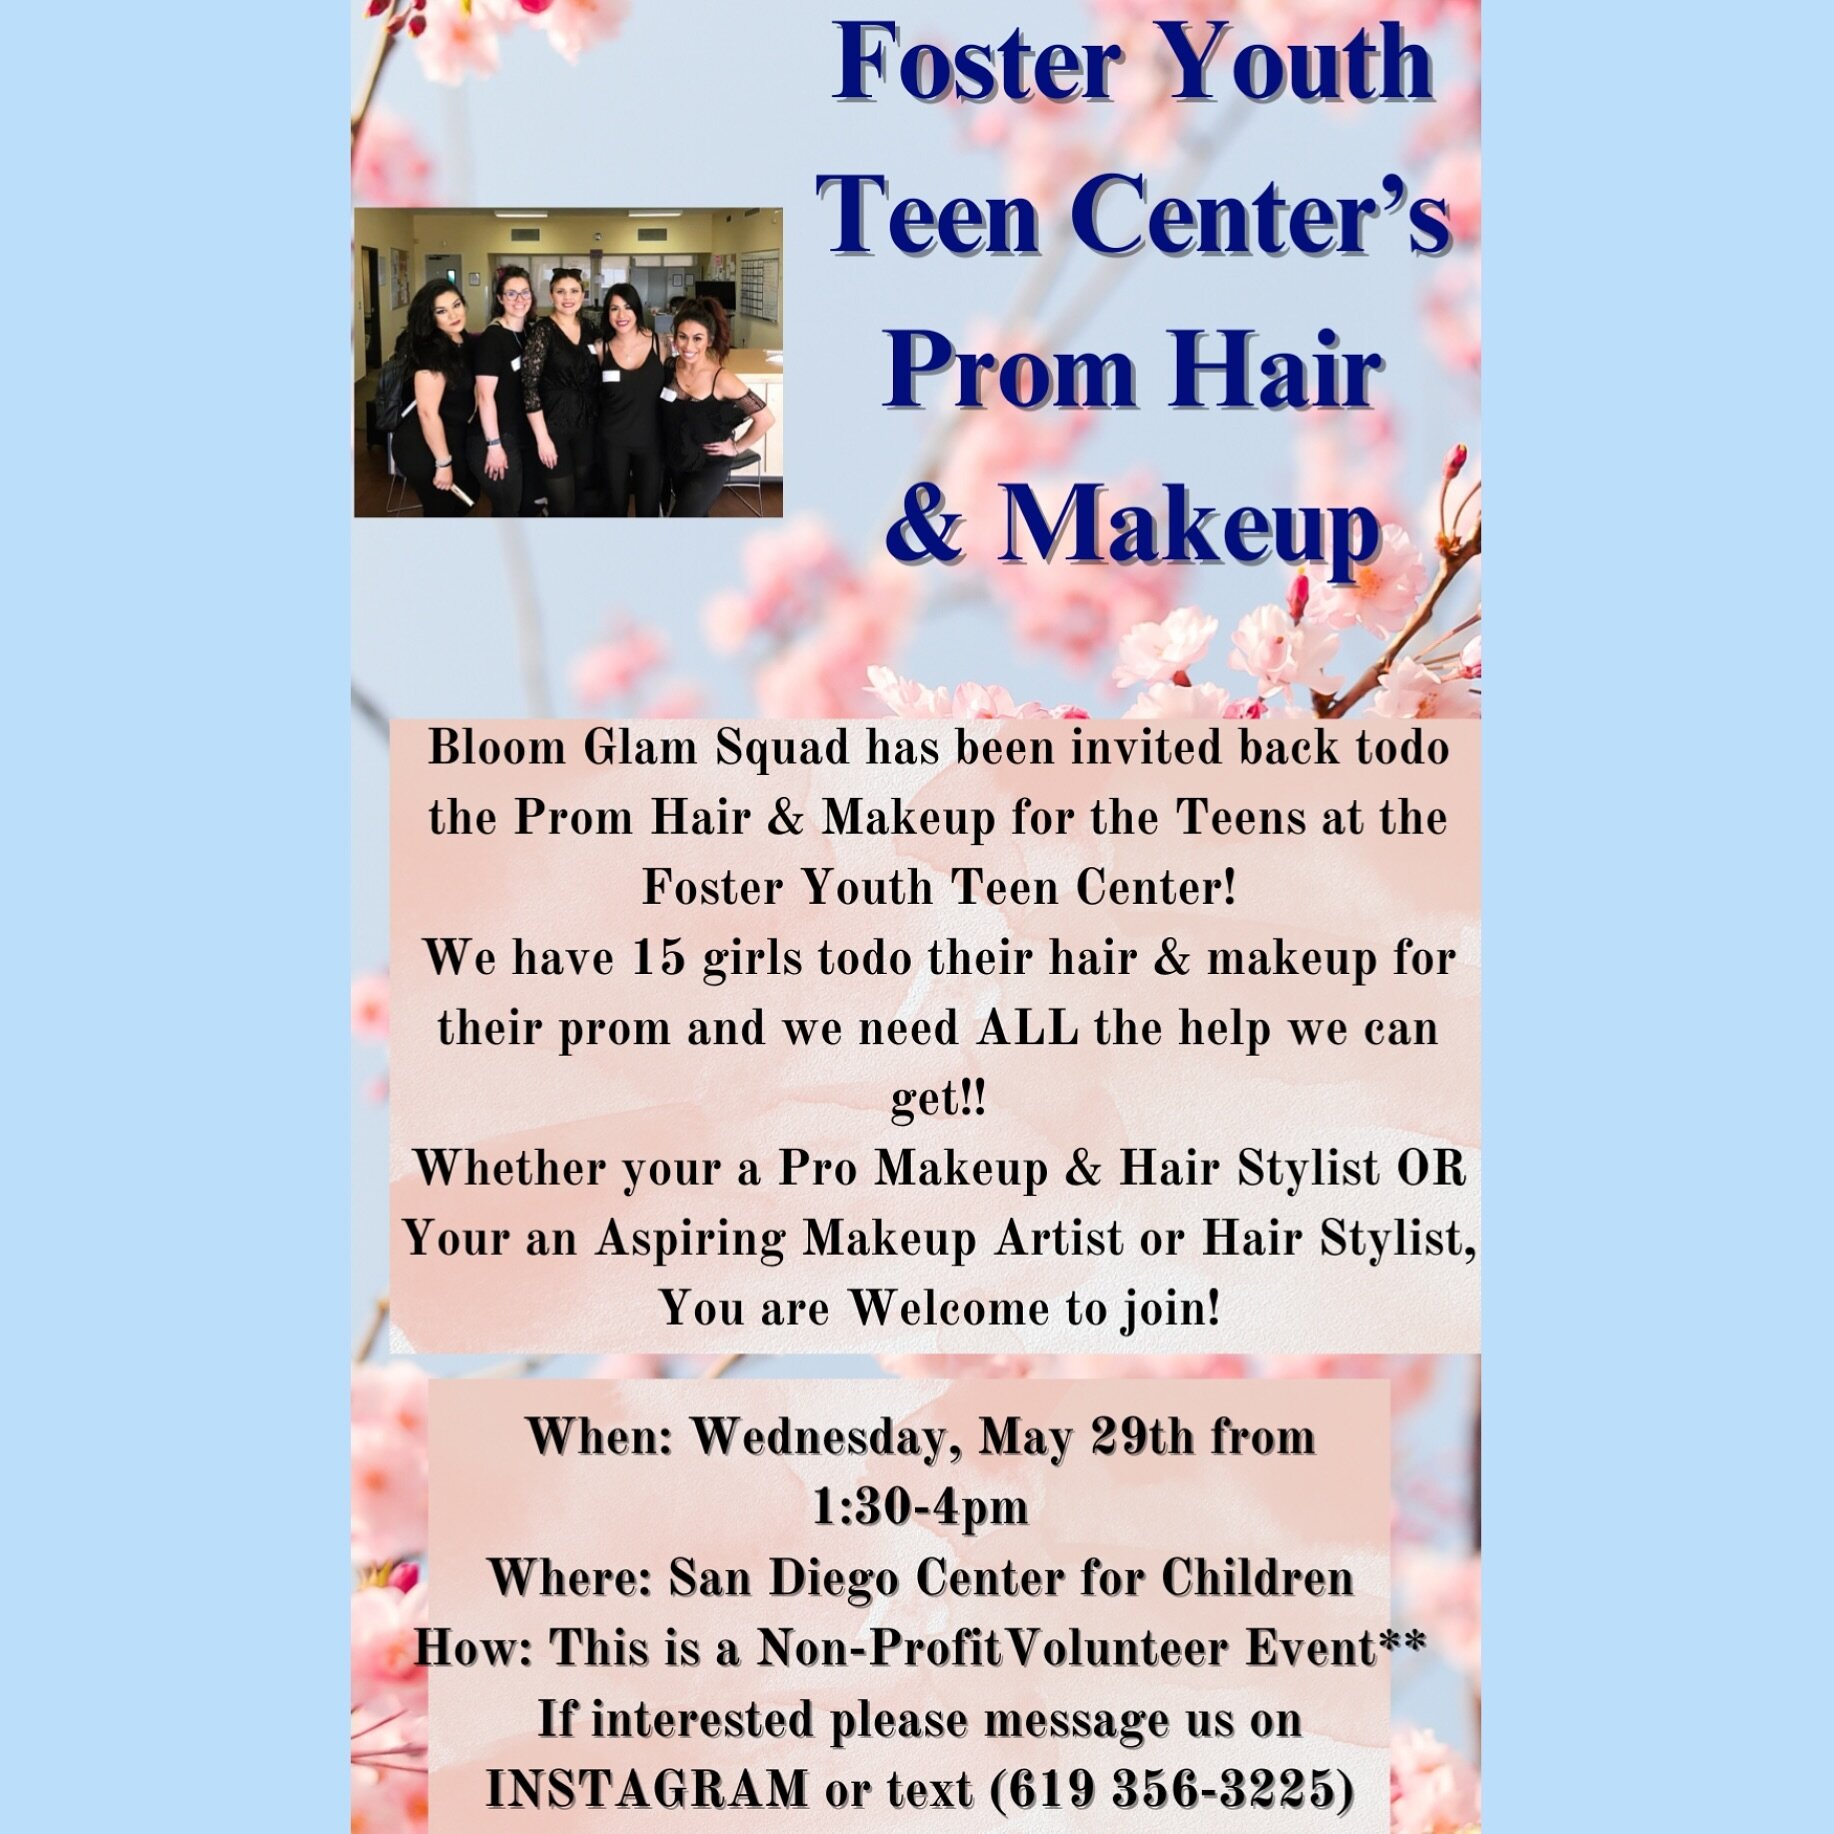 We have been invited back todo the Prom Hair &amp; Makeup for the Teens at the Foster Youth Teen Center! This is a Nonprofit Even and we are welcoming all who love to glam &amp; give back! 🤗
We have 15 girls to glam hair &amp; makeup so we need Lots